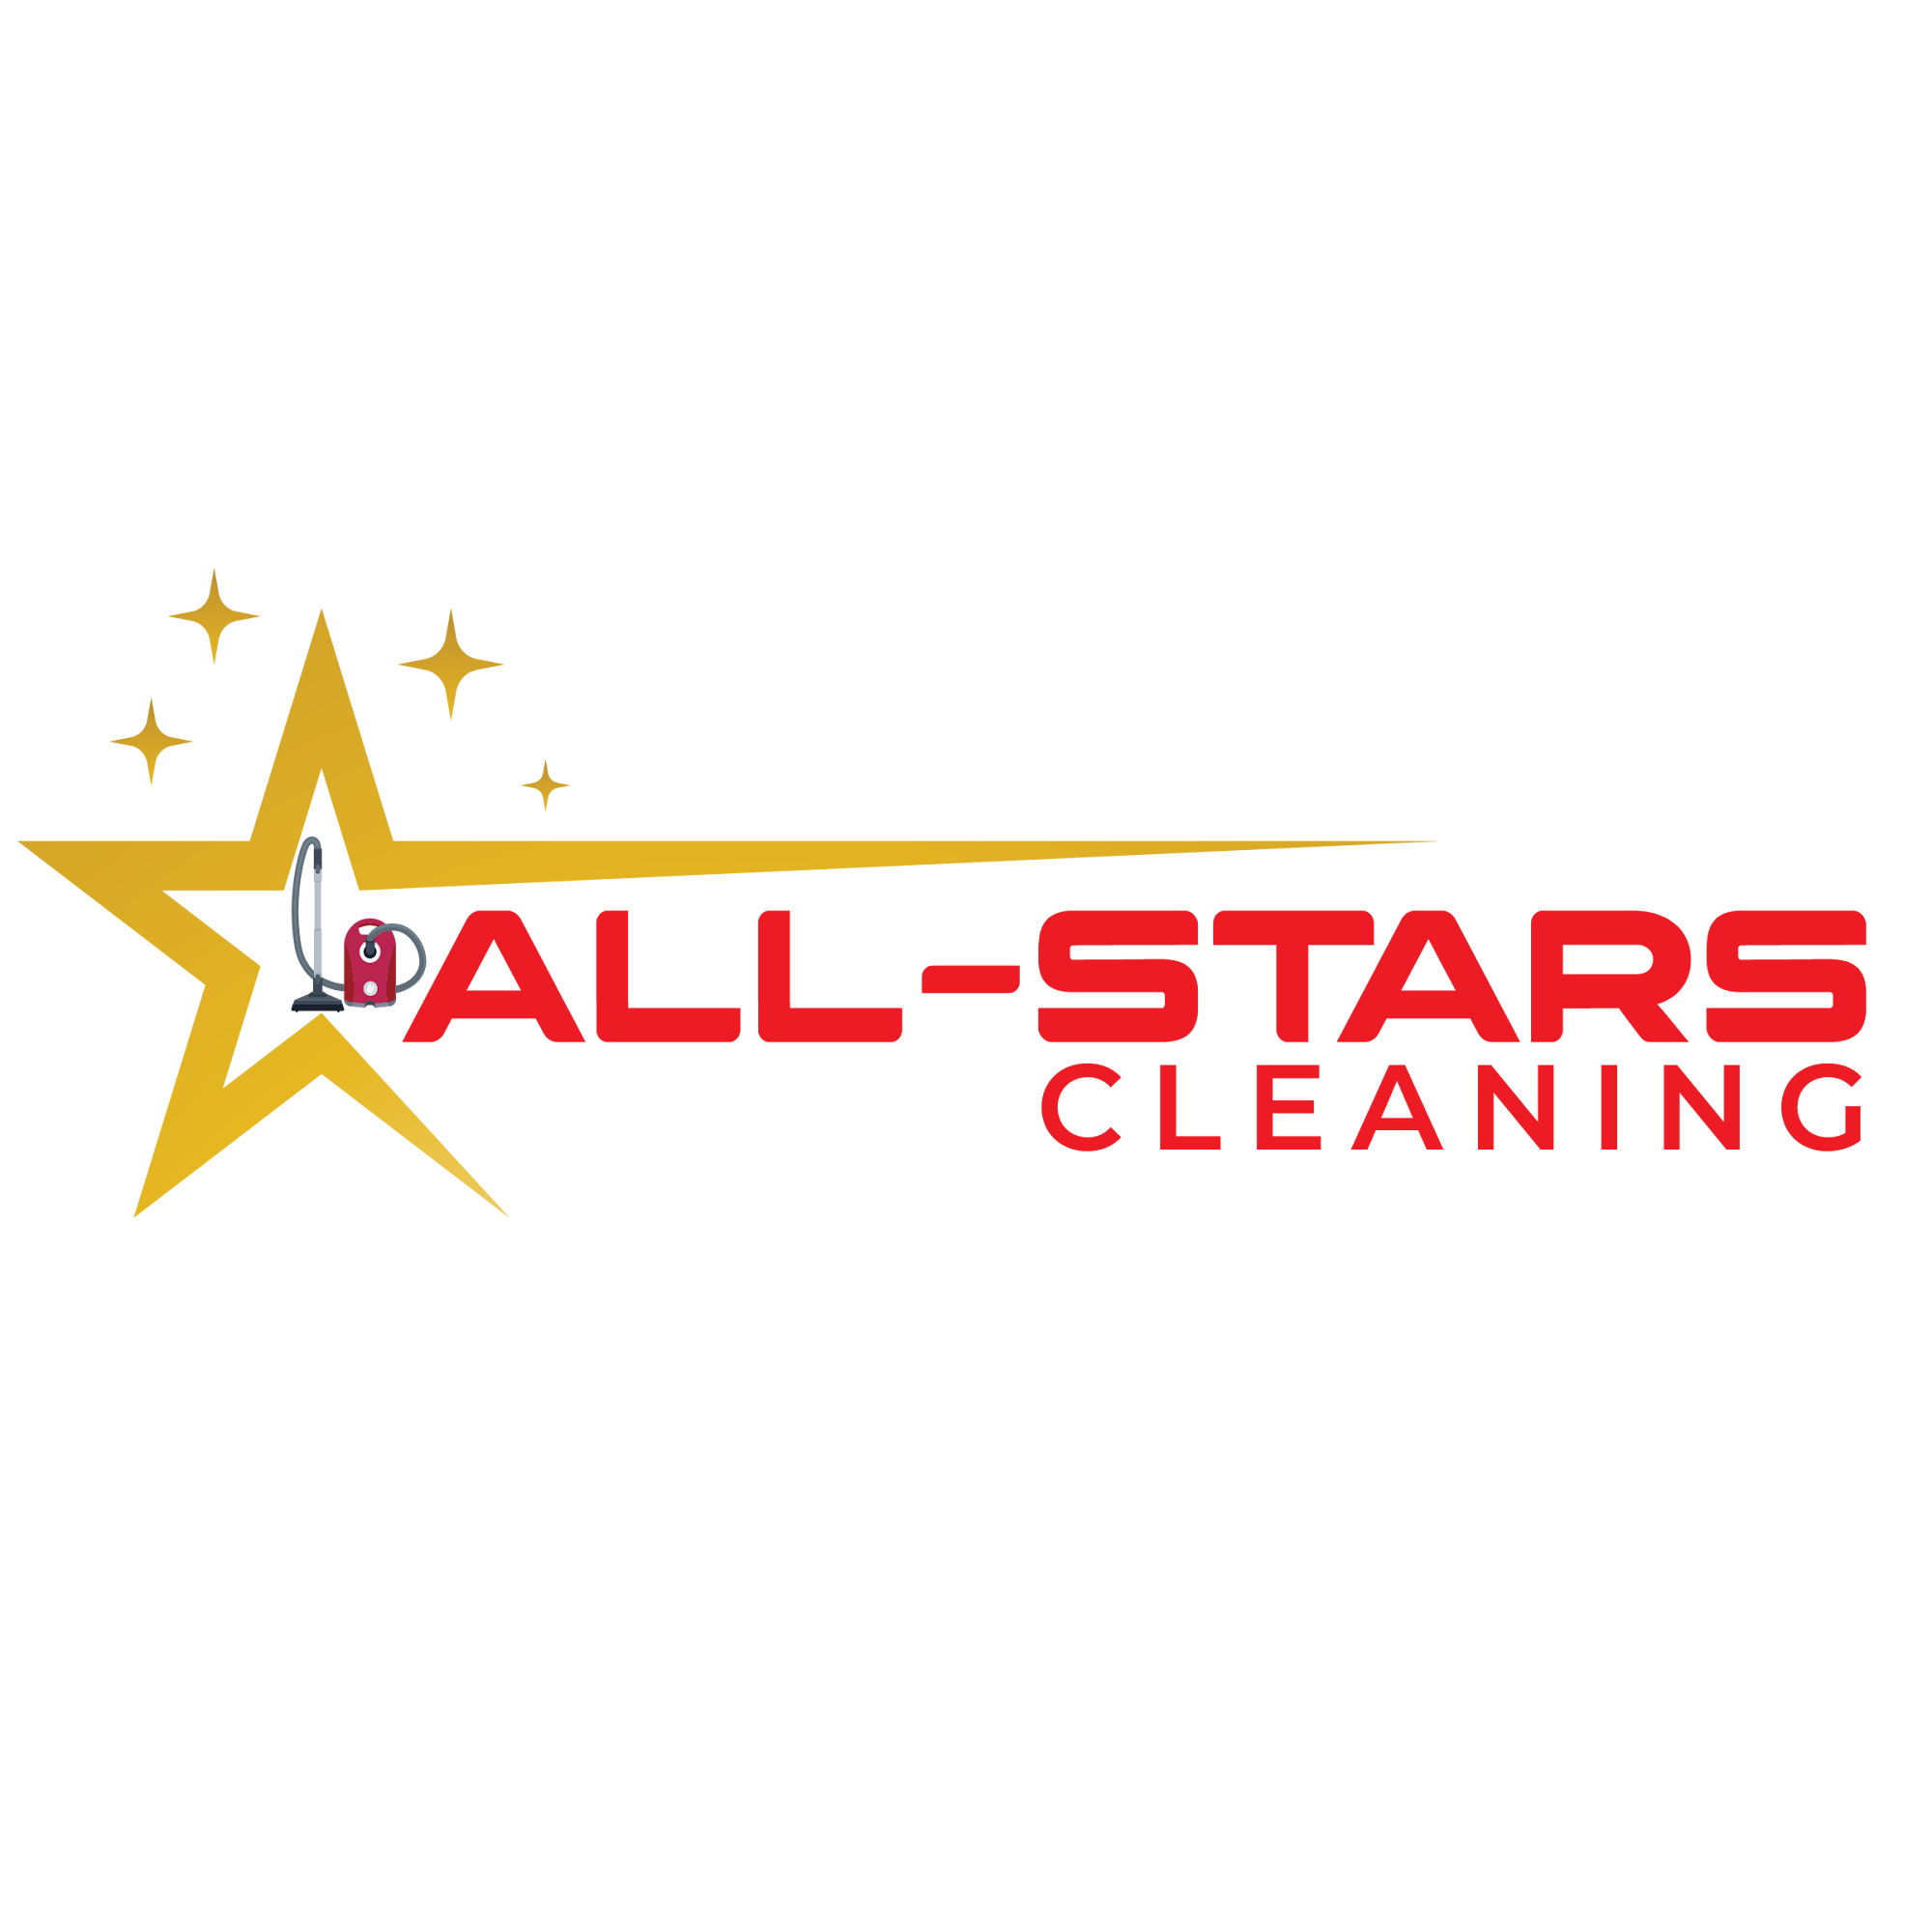 All-Stars Cleaning